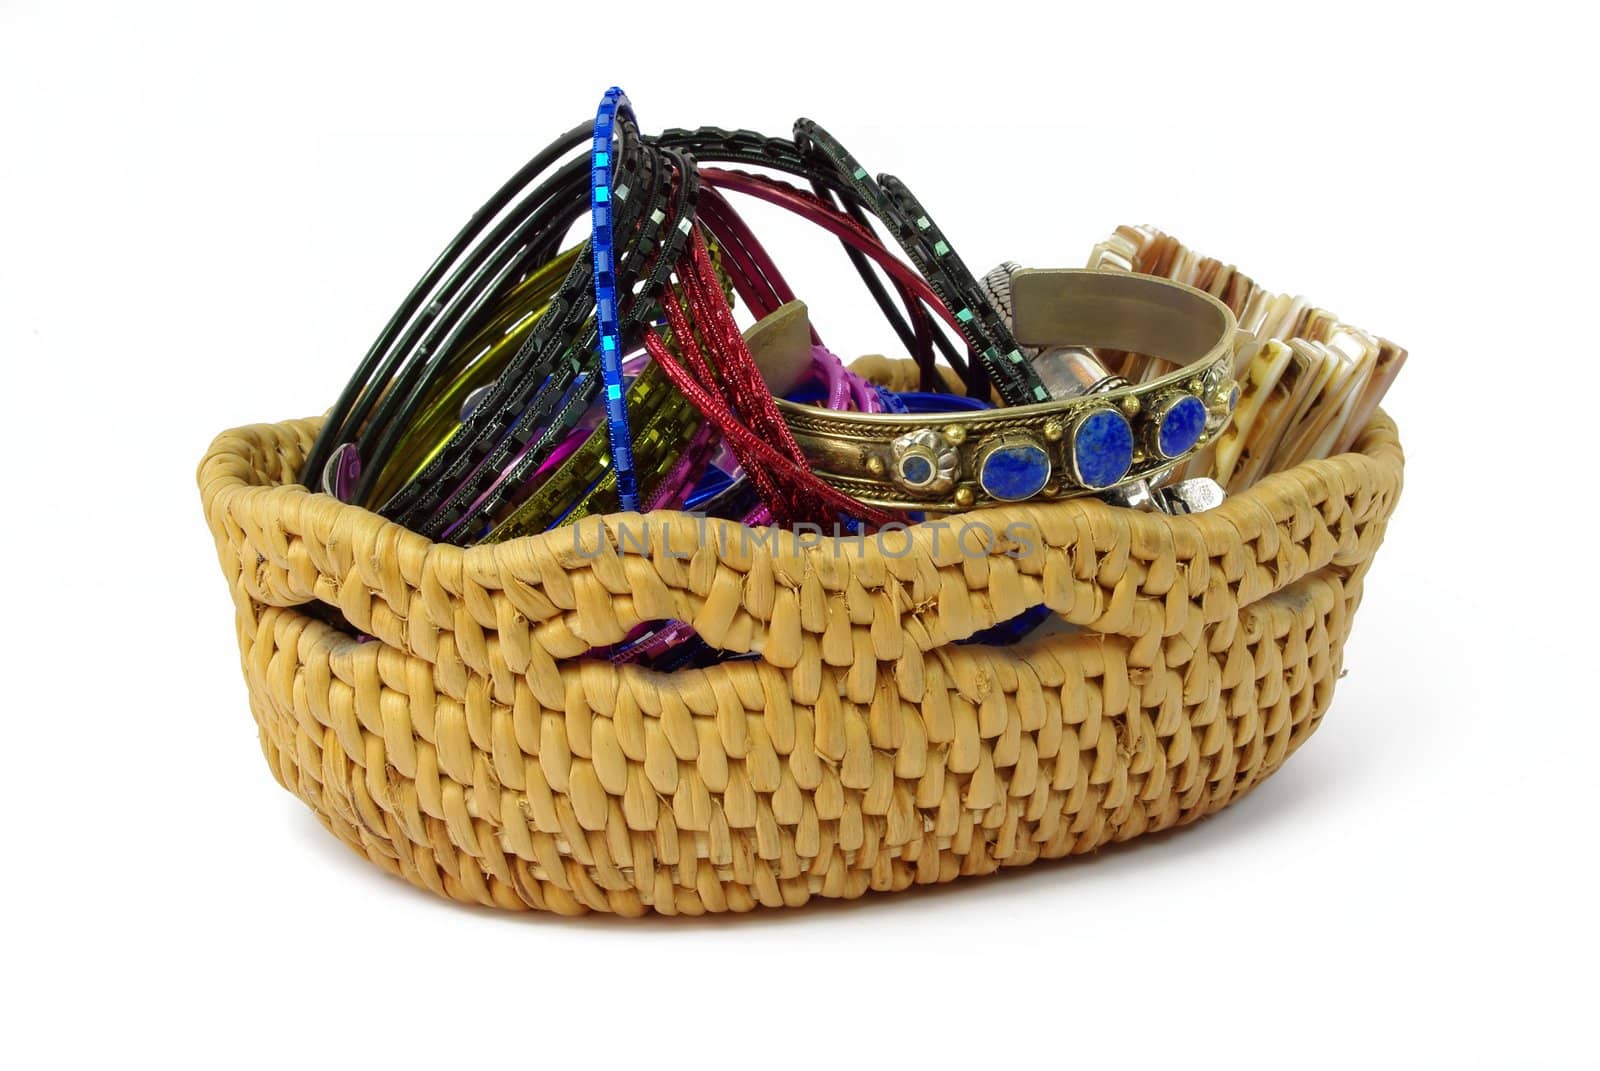 Wicker case with beads and bracelets by Vitamin